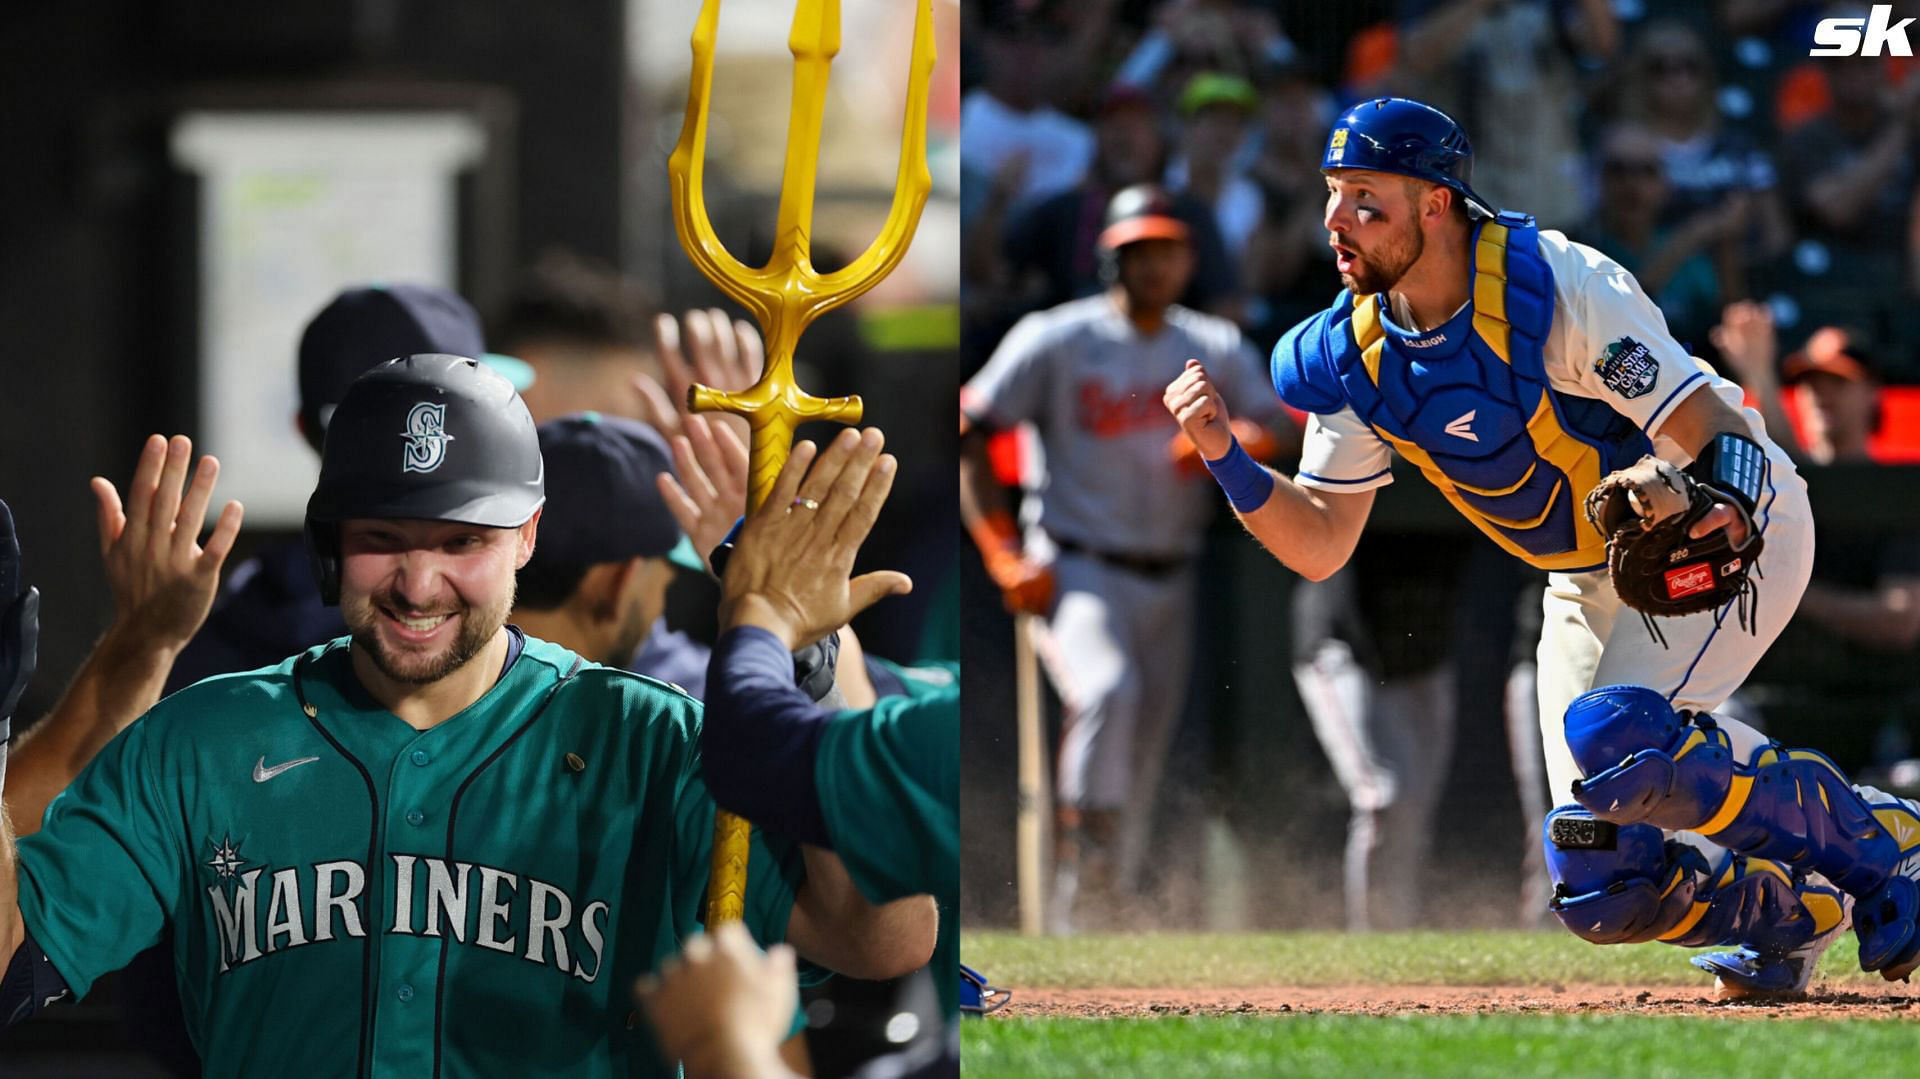 Will the Mariners extend Cal Raleigh's contract? Redhot catcher's MLB